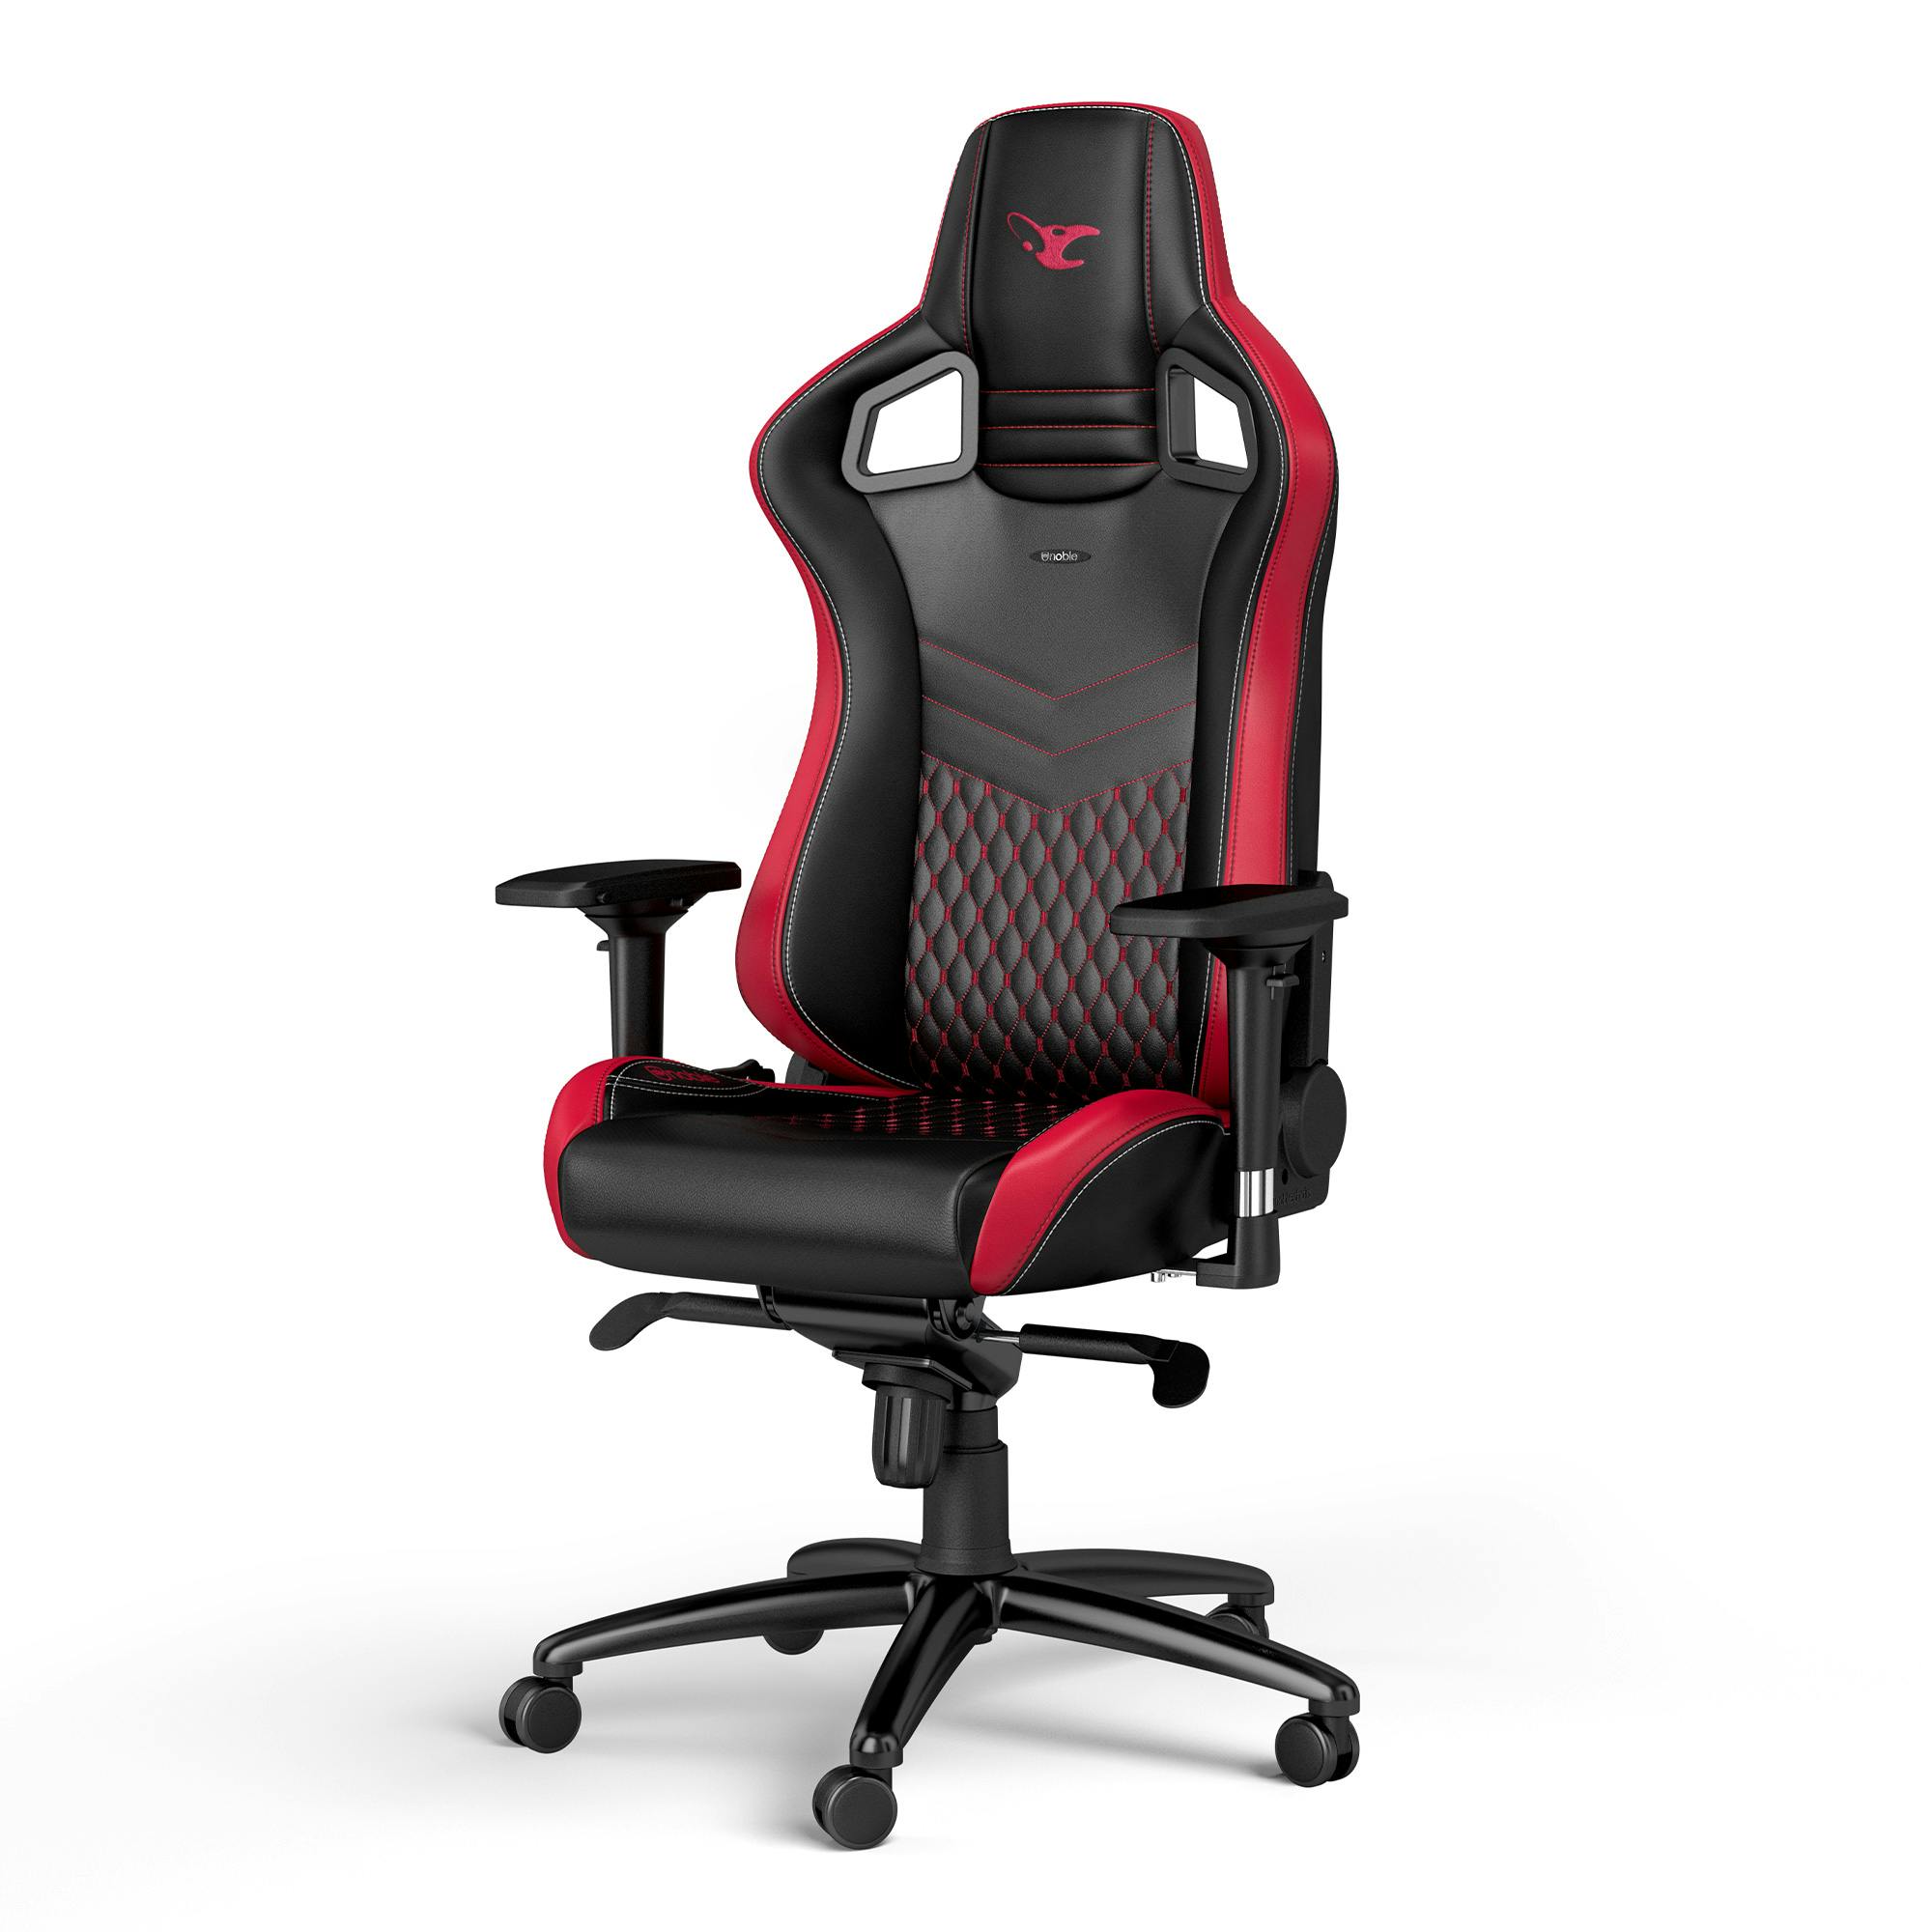 Noblechairs - EPIC mousesports Edition